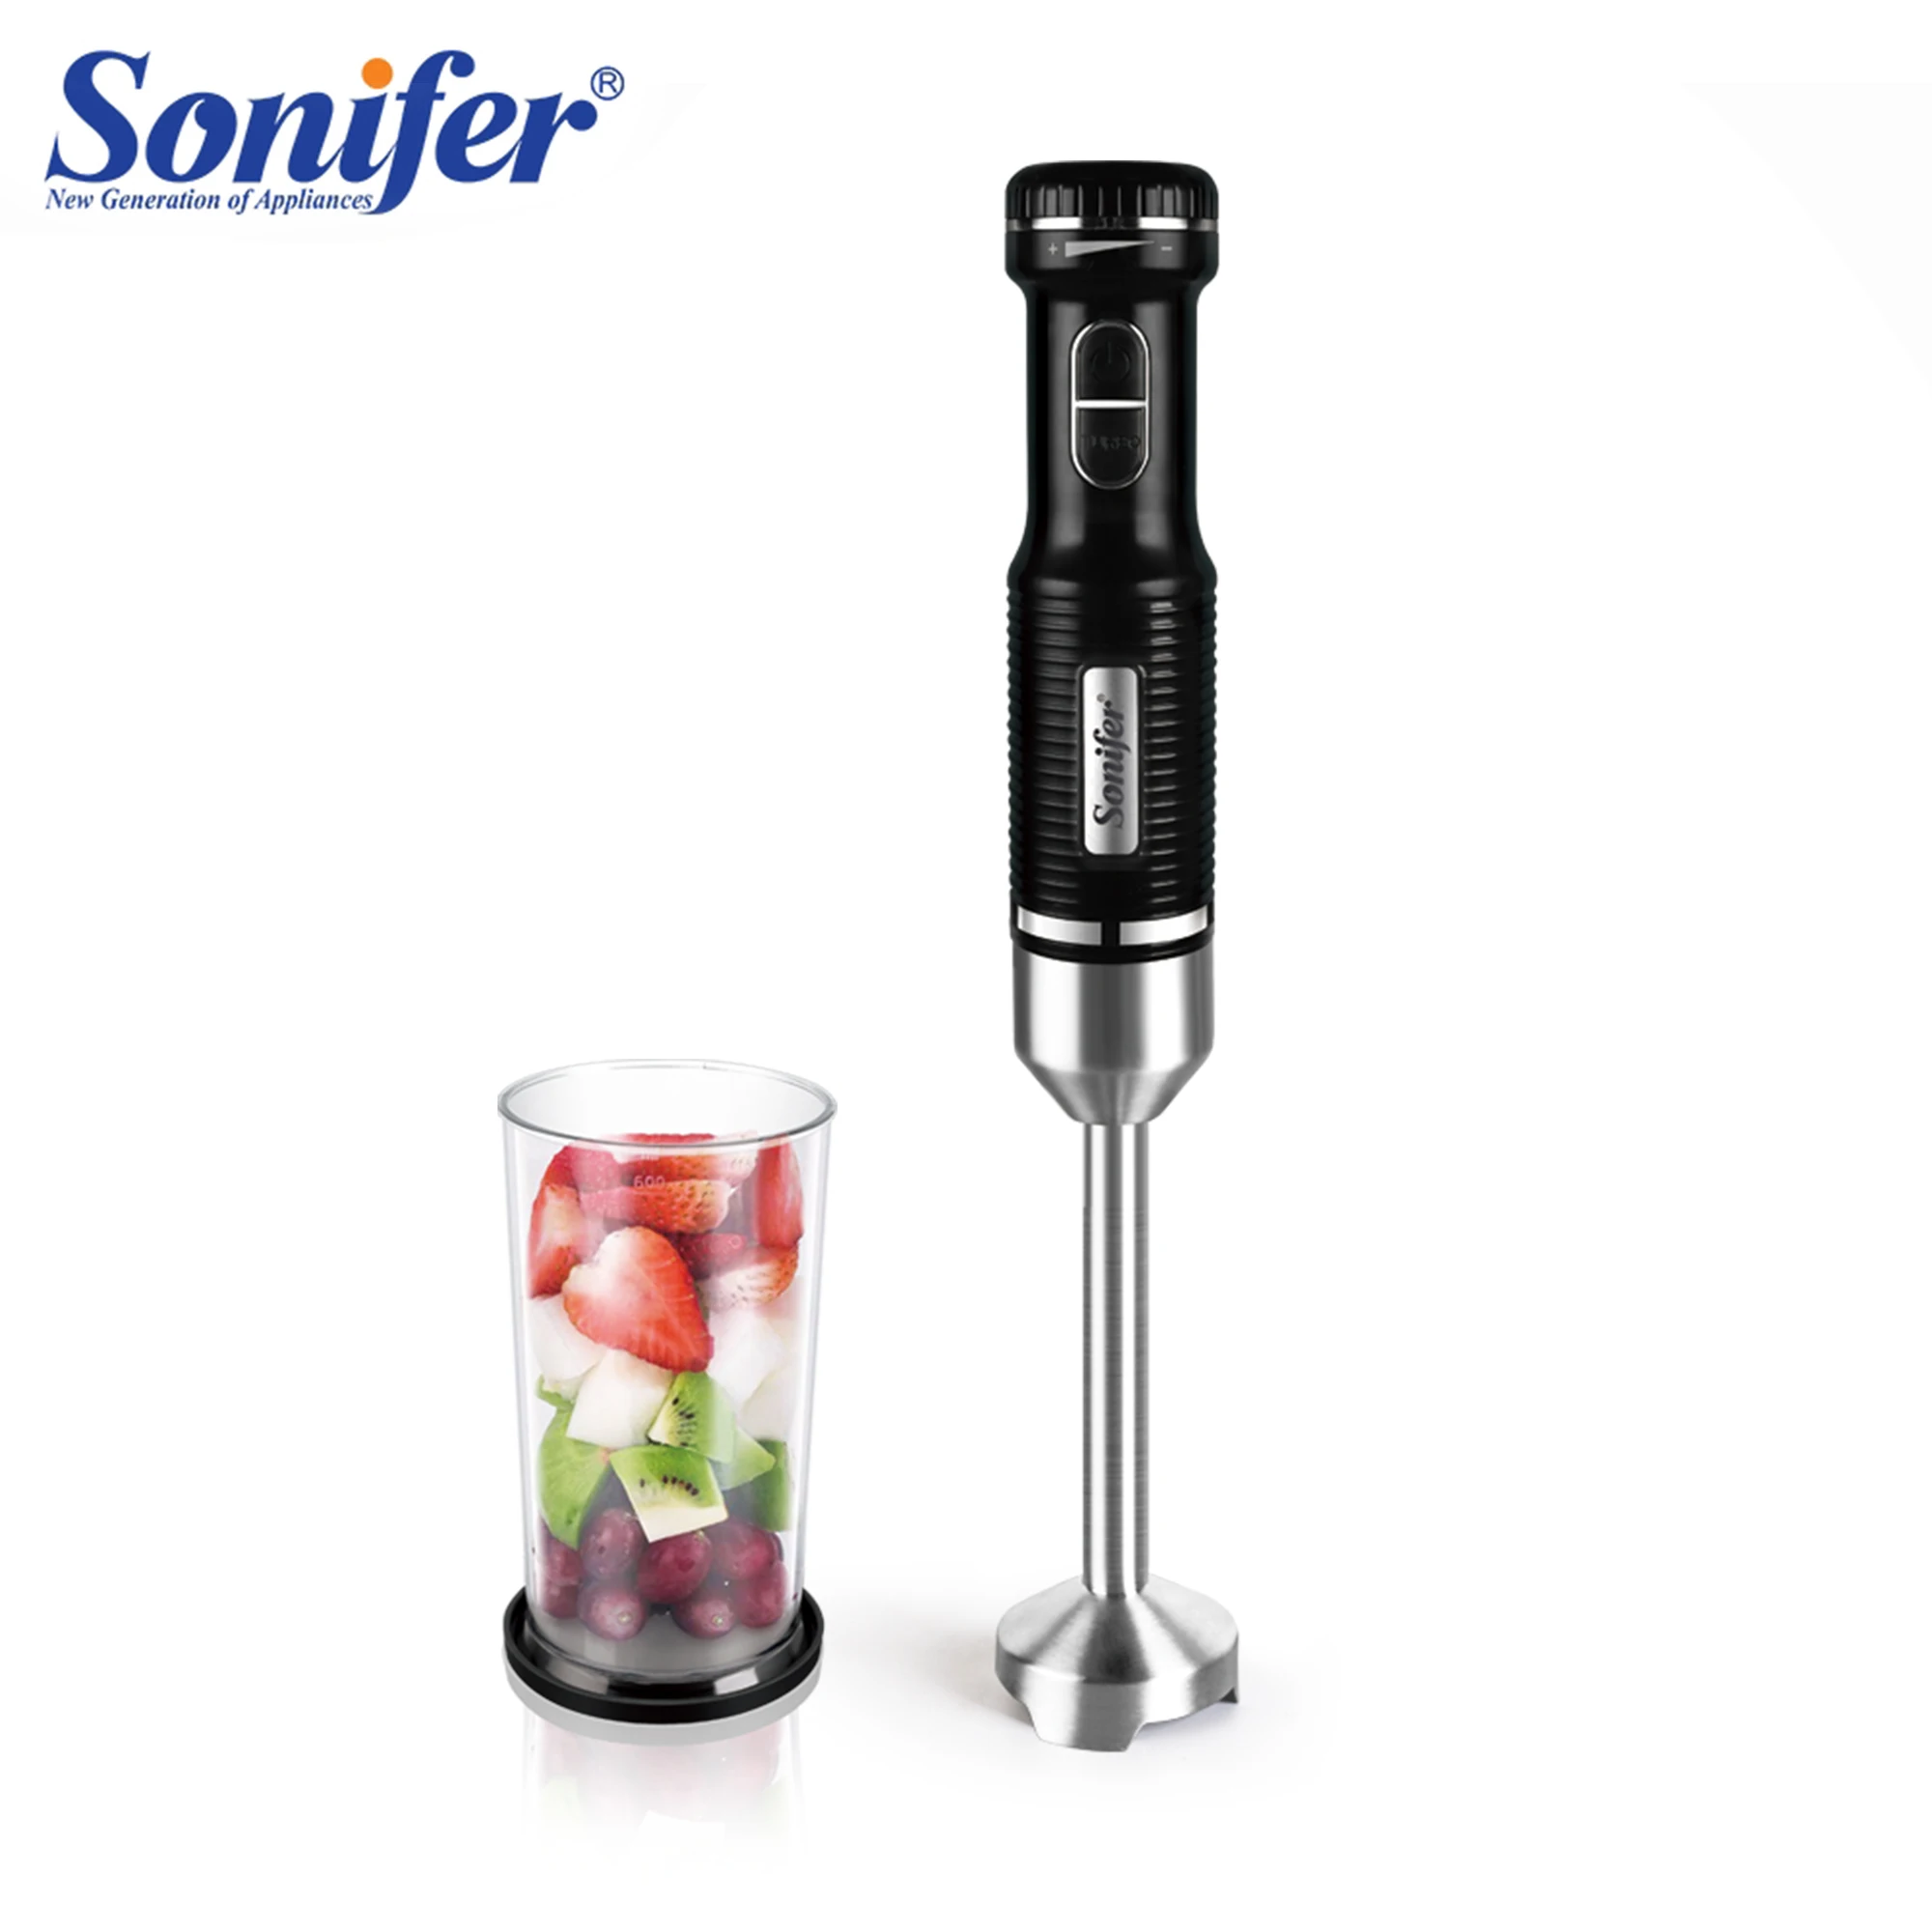 https://ae01.alicdn.com/kf/Sae90e746f31741f9b18b68f894cd7f11O/Immersion-Blender-Hand-Food-Mixer-Includes-Chopper-and-600ml-Smoothie-Cup-Stainless-Steel-Ice-Blades-Whisk.jpg_.webp